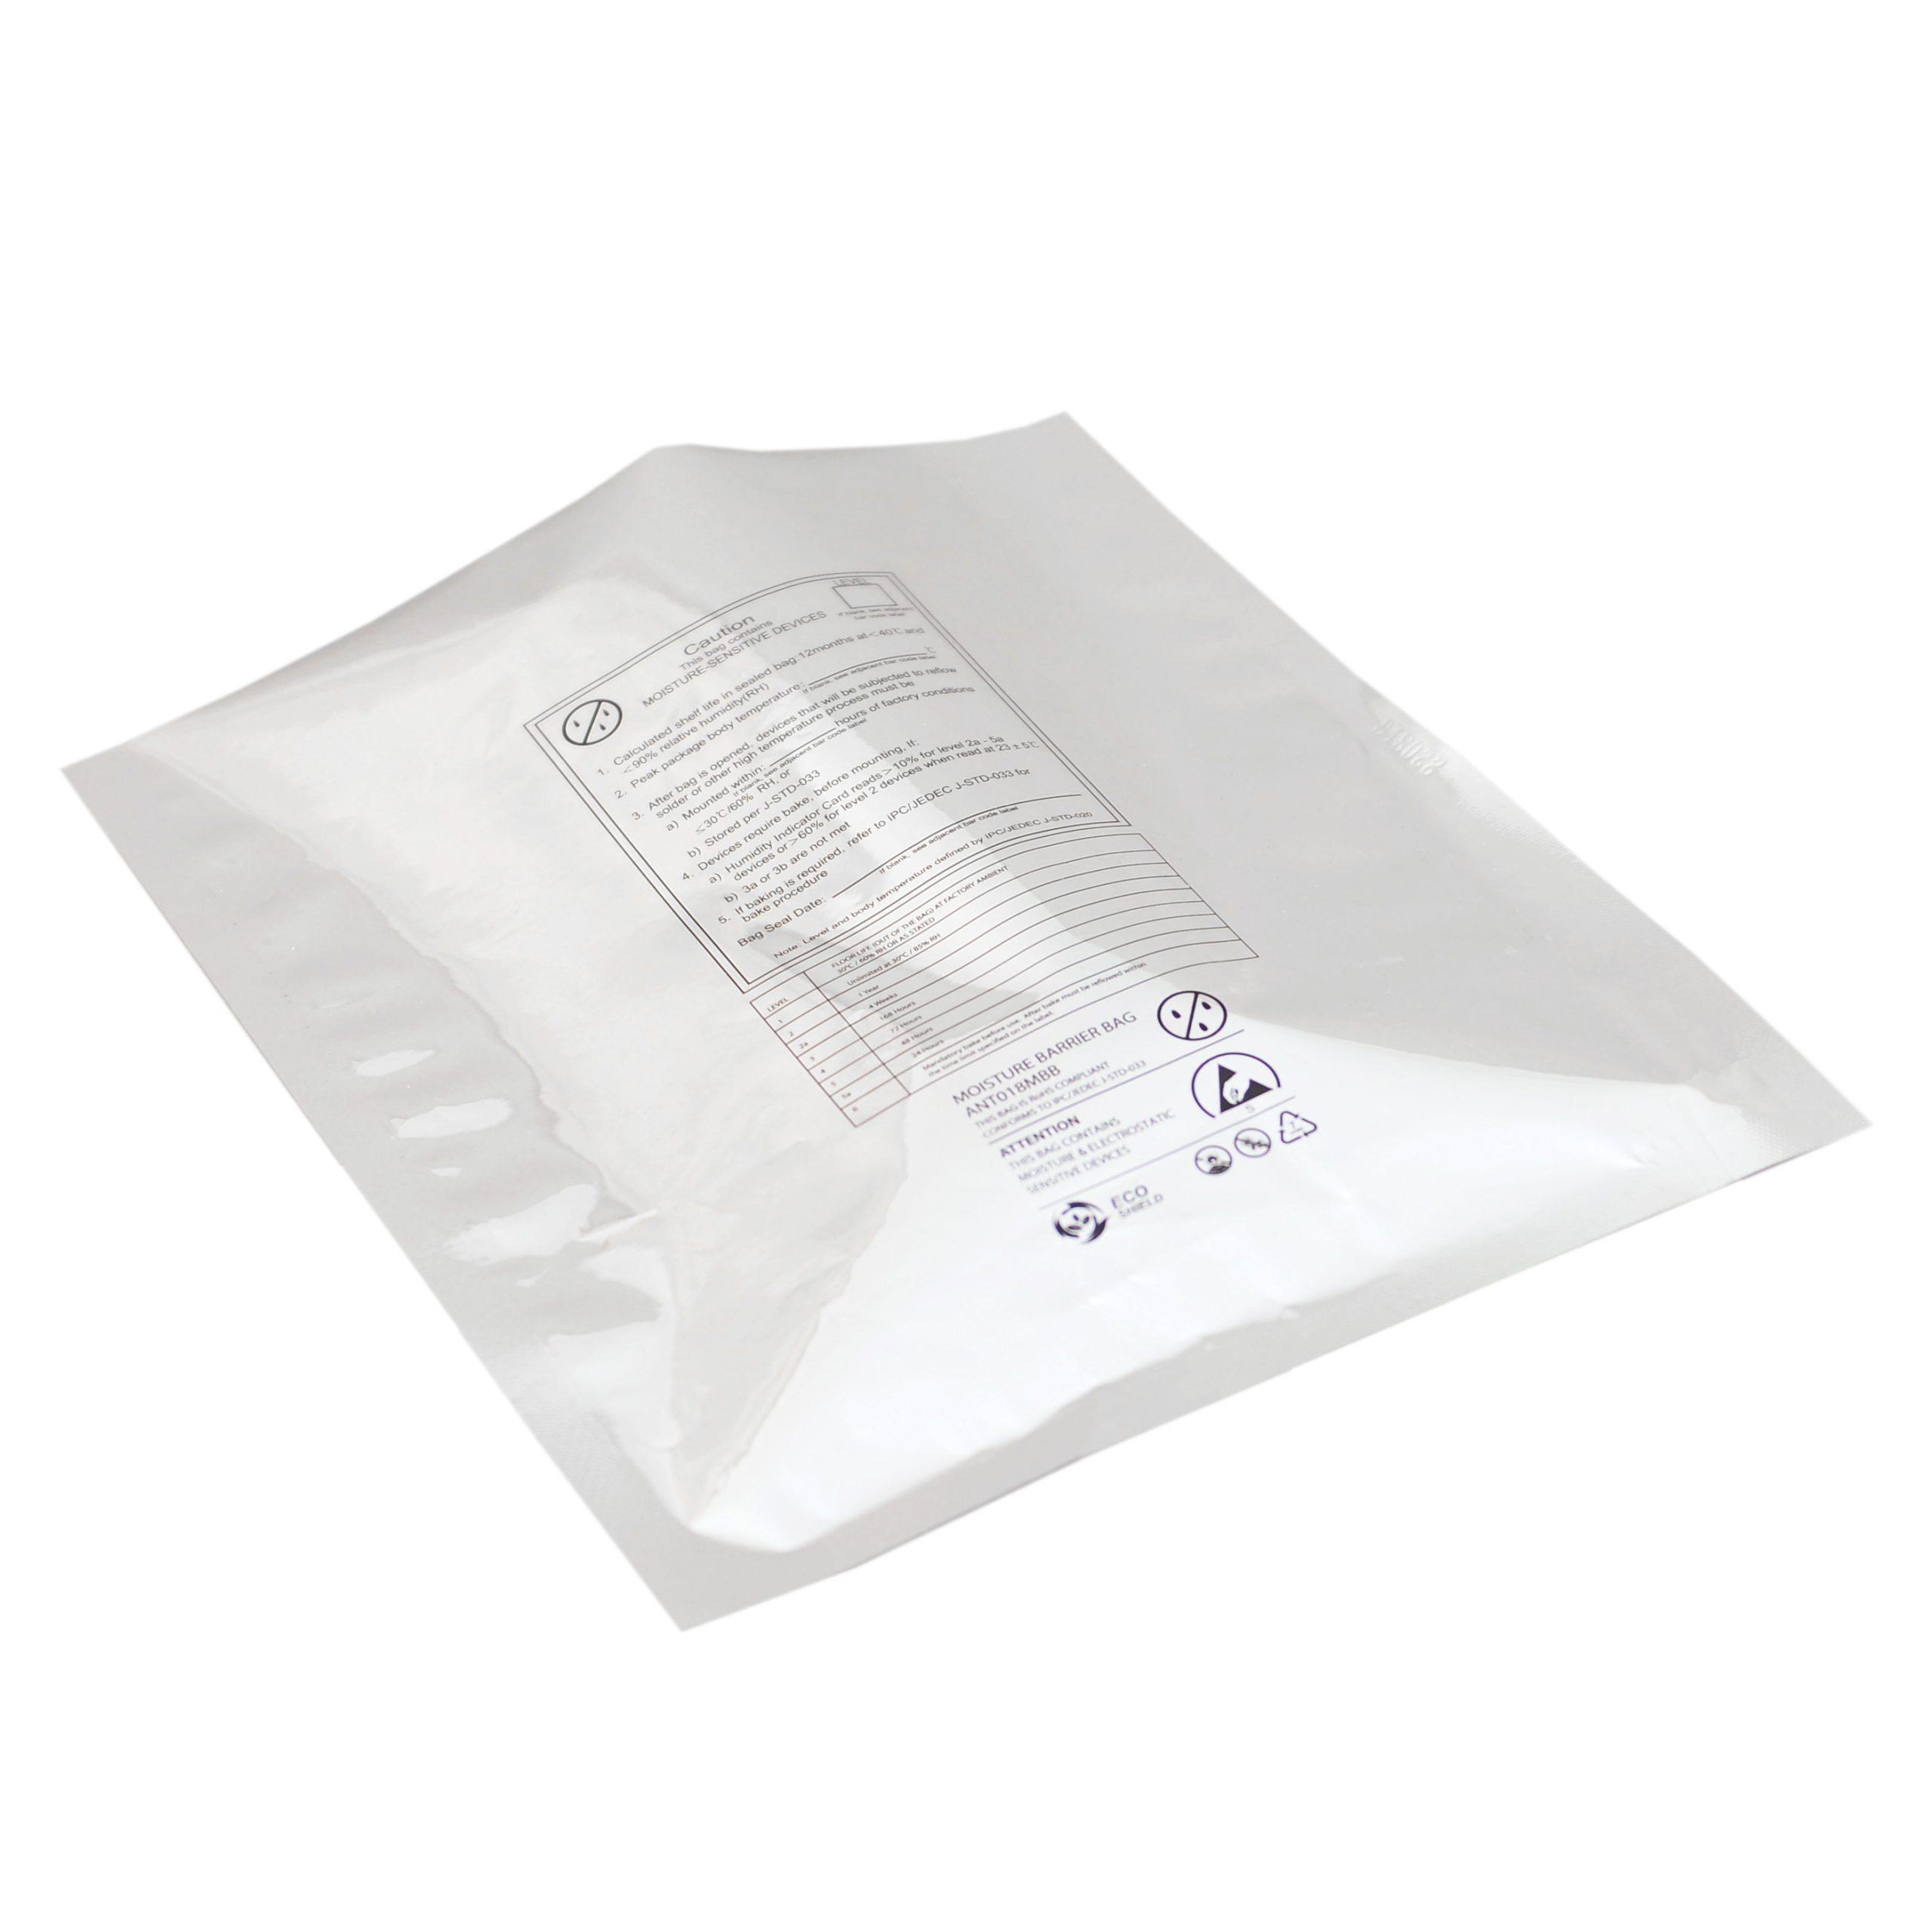 Product Moisture Barrier Bags - 3.6Mil - Antistat (UK) ESD Protection image